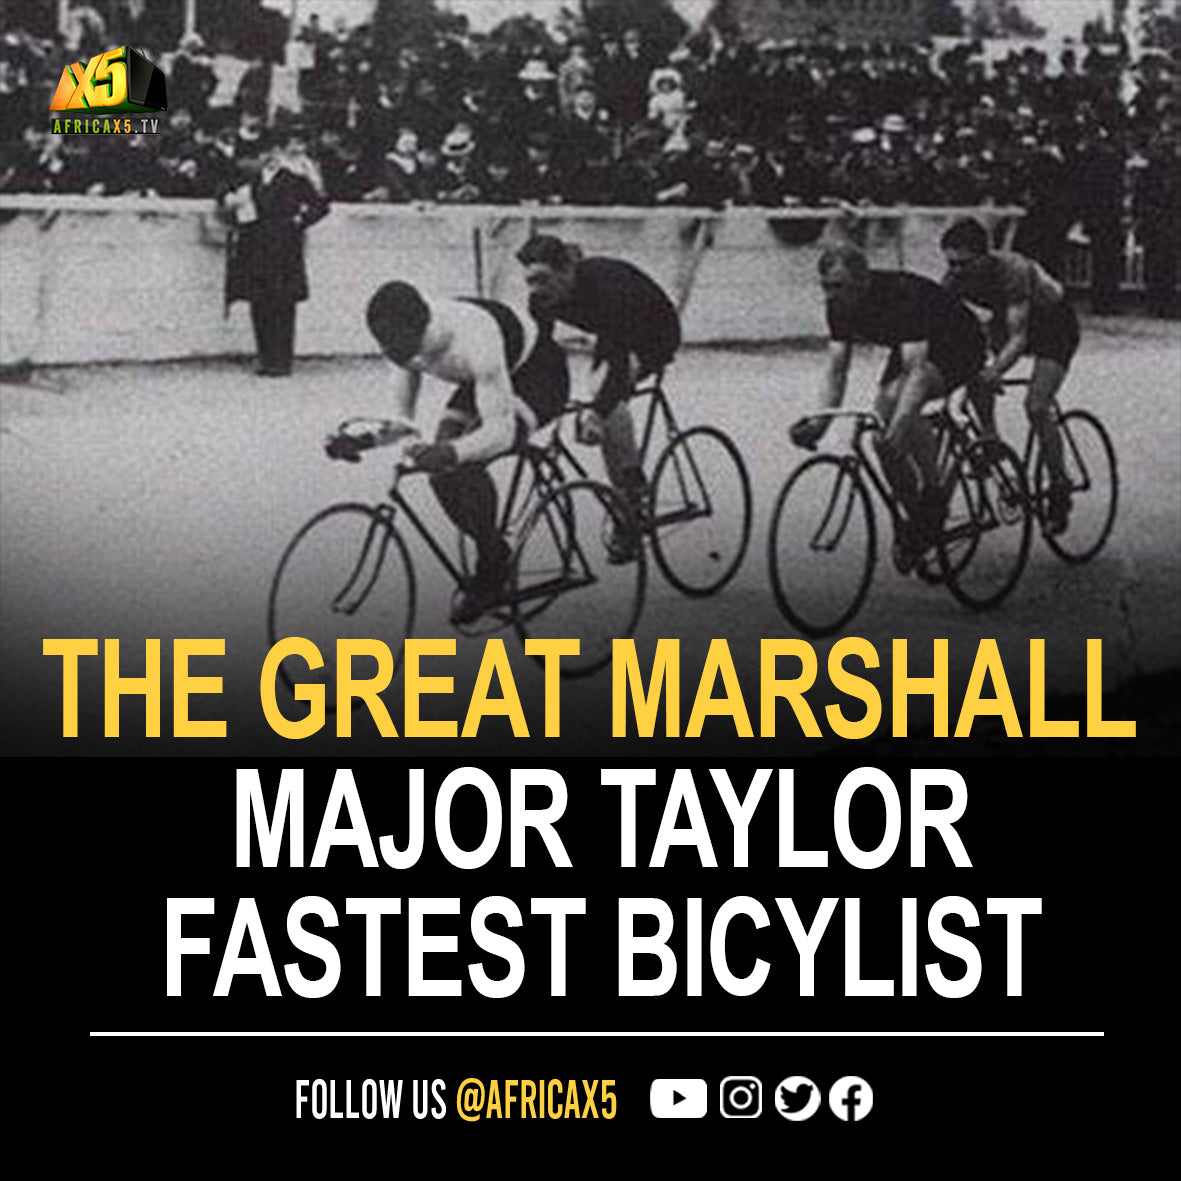 Marshall “Major” Taylor was the fastest bicyclist in the world.